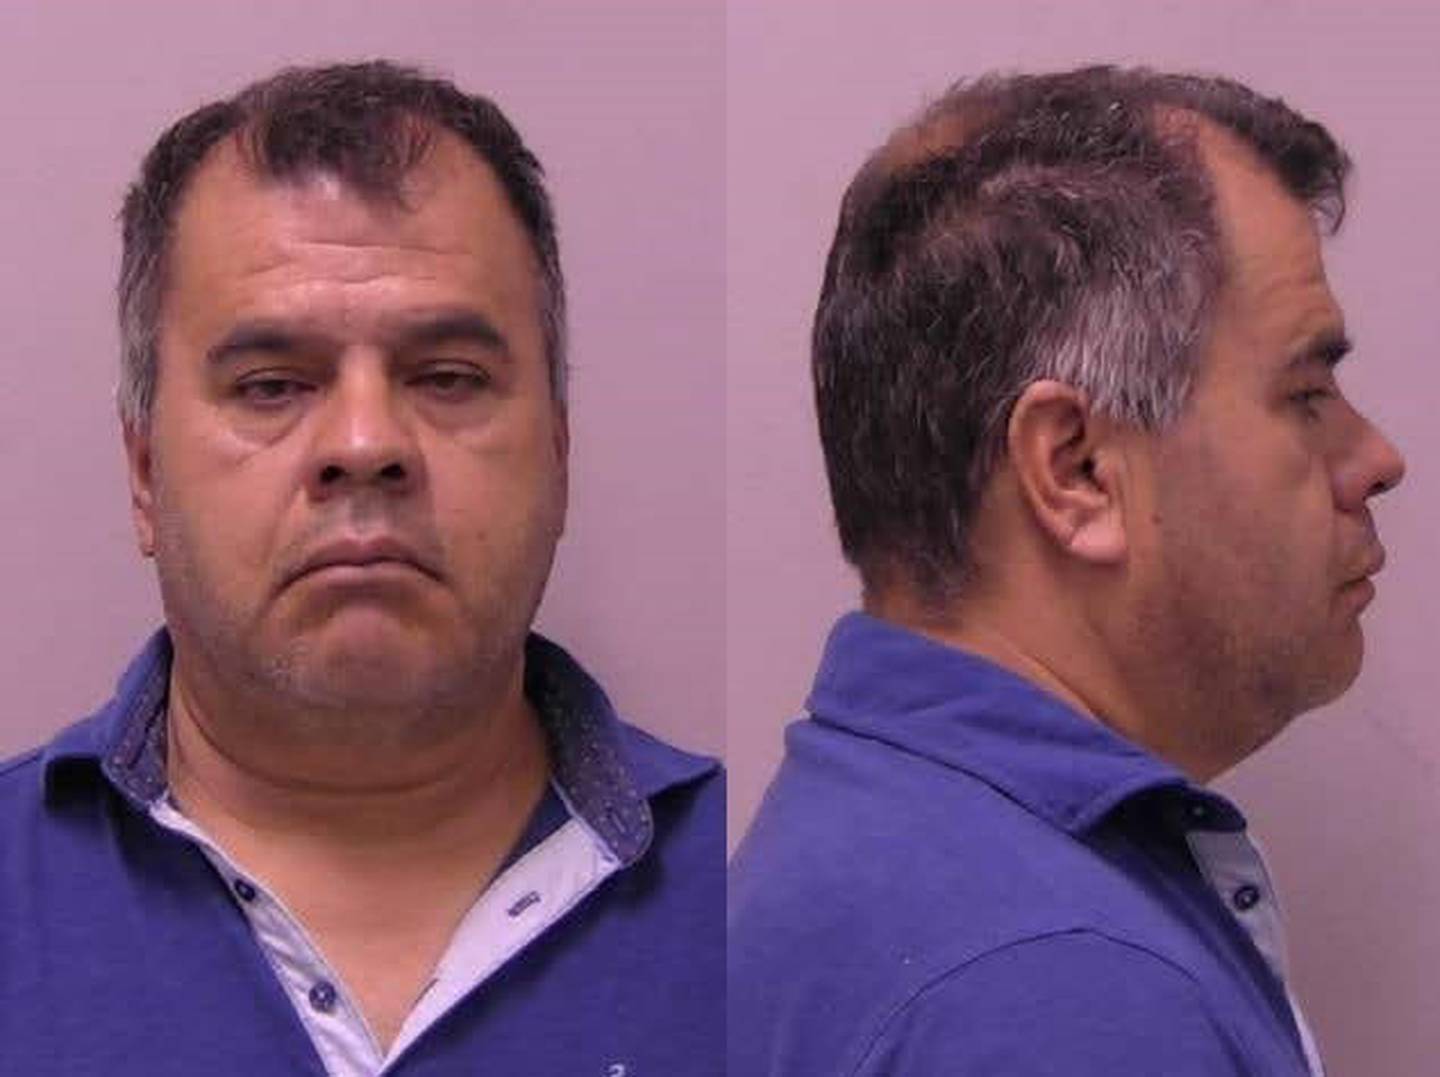 Hector Briseno, 54, of Chicago was charged with Involuntary Servitude (Class X Felony),Trafficking in Persons (Class 1 Felony), Involuntary Servitude (Class 1 Felony), Involuntary Servitude (Class 4 Felony) and Promoting Prostitution.